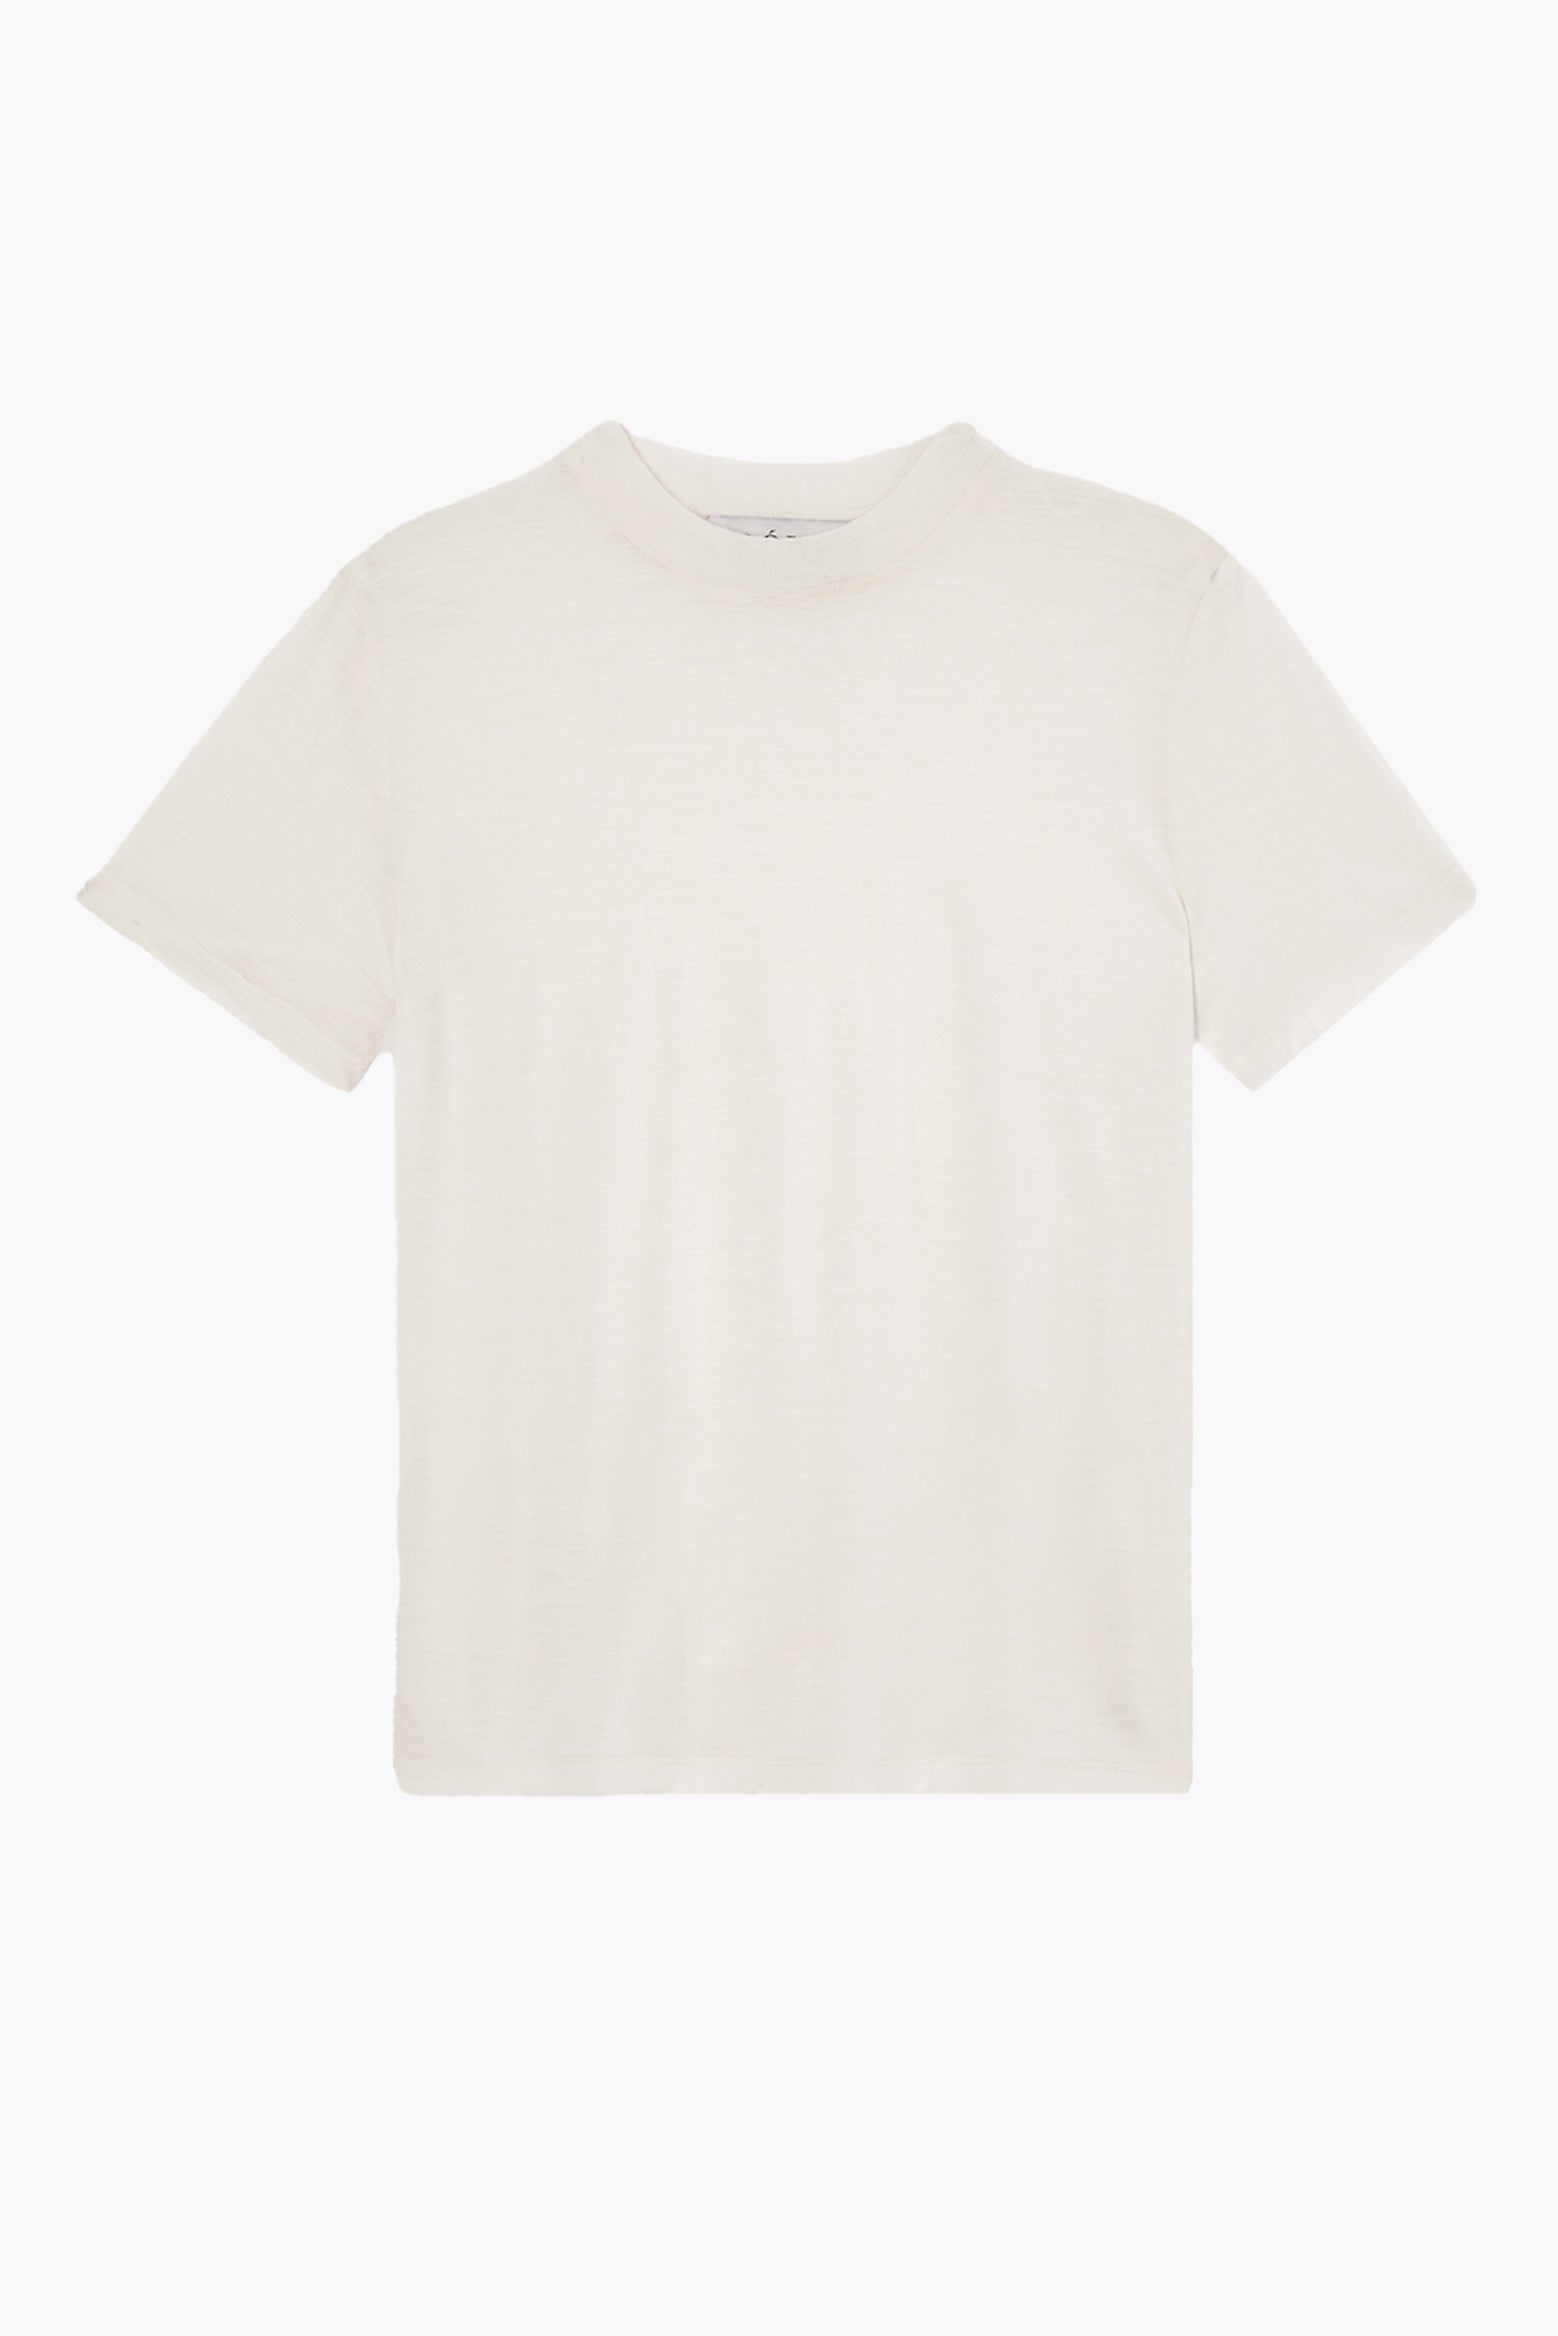 Rohe Summer Wool Jersey T-Shirt available at The New Trend Australia. 